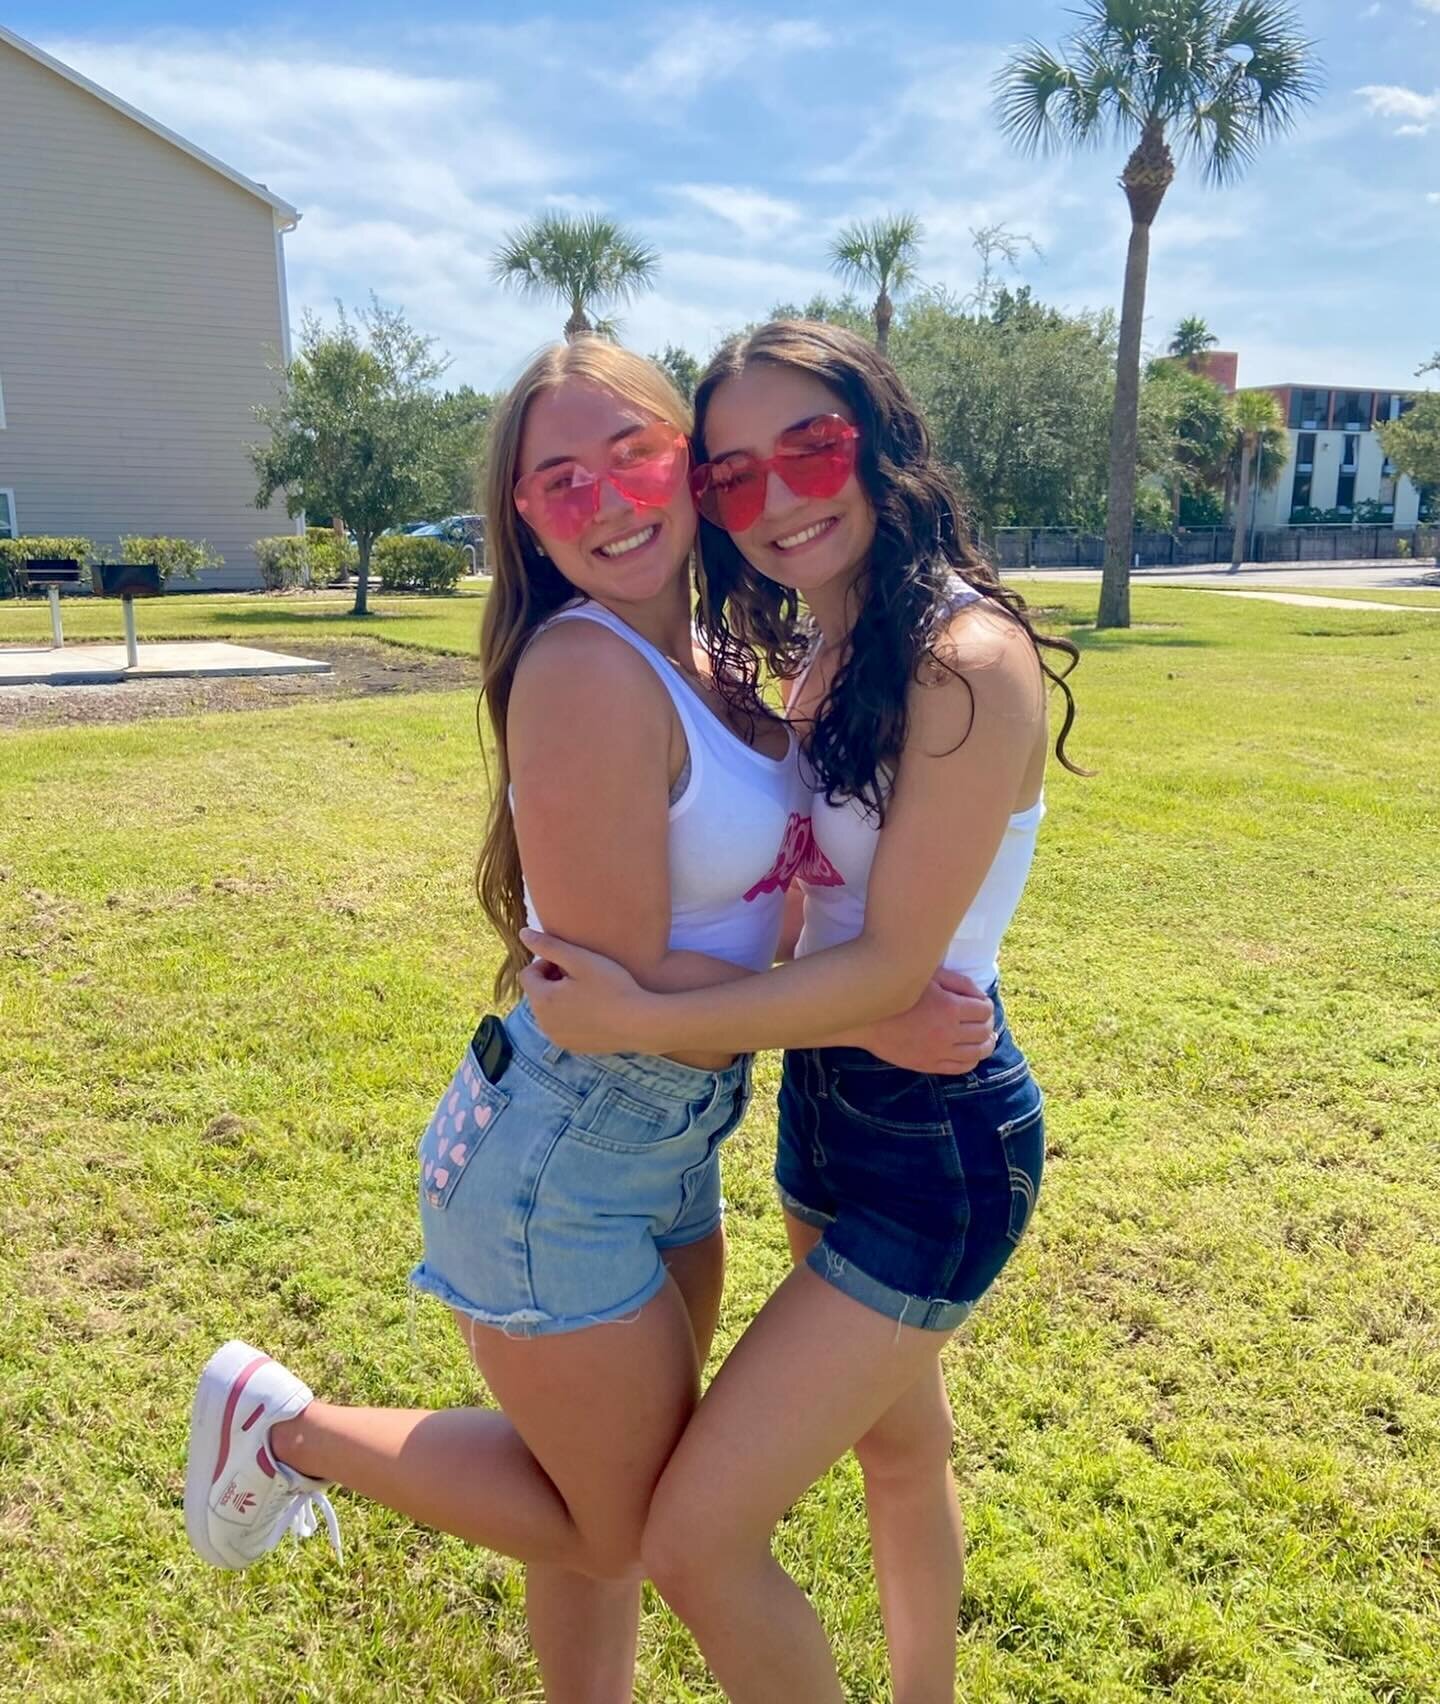 Happy national make a friend day💓💓
We are so lucky for all of the friendships made through Gamma Phi &amp; are looking forward to the ones we will continue to make🌙 
#trueandconstant